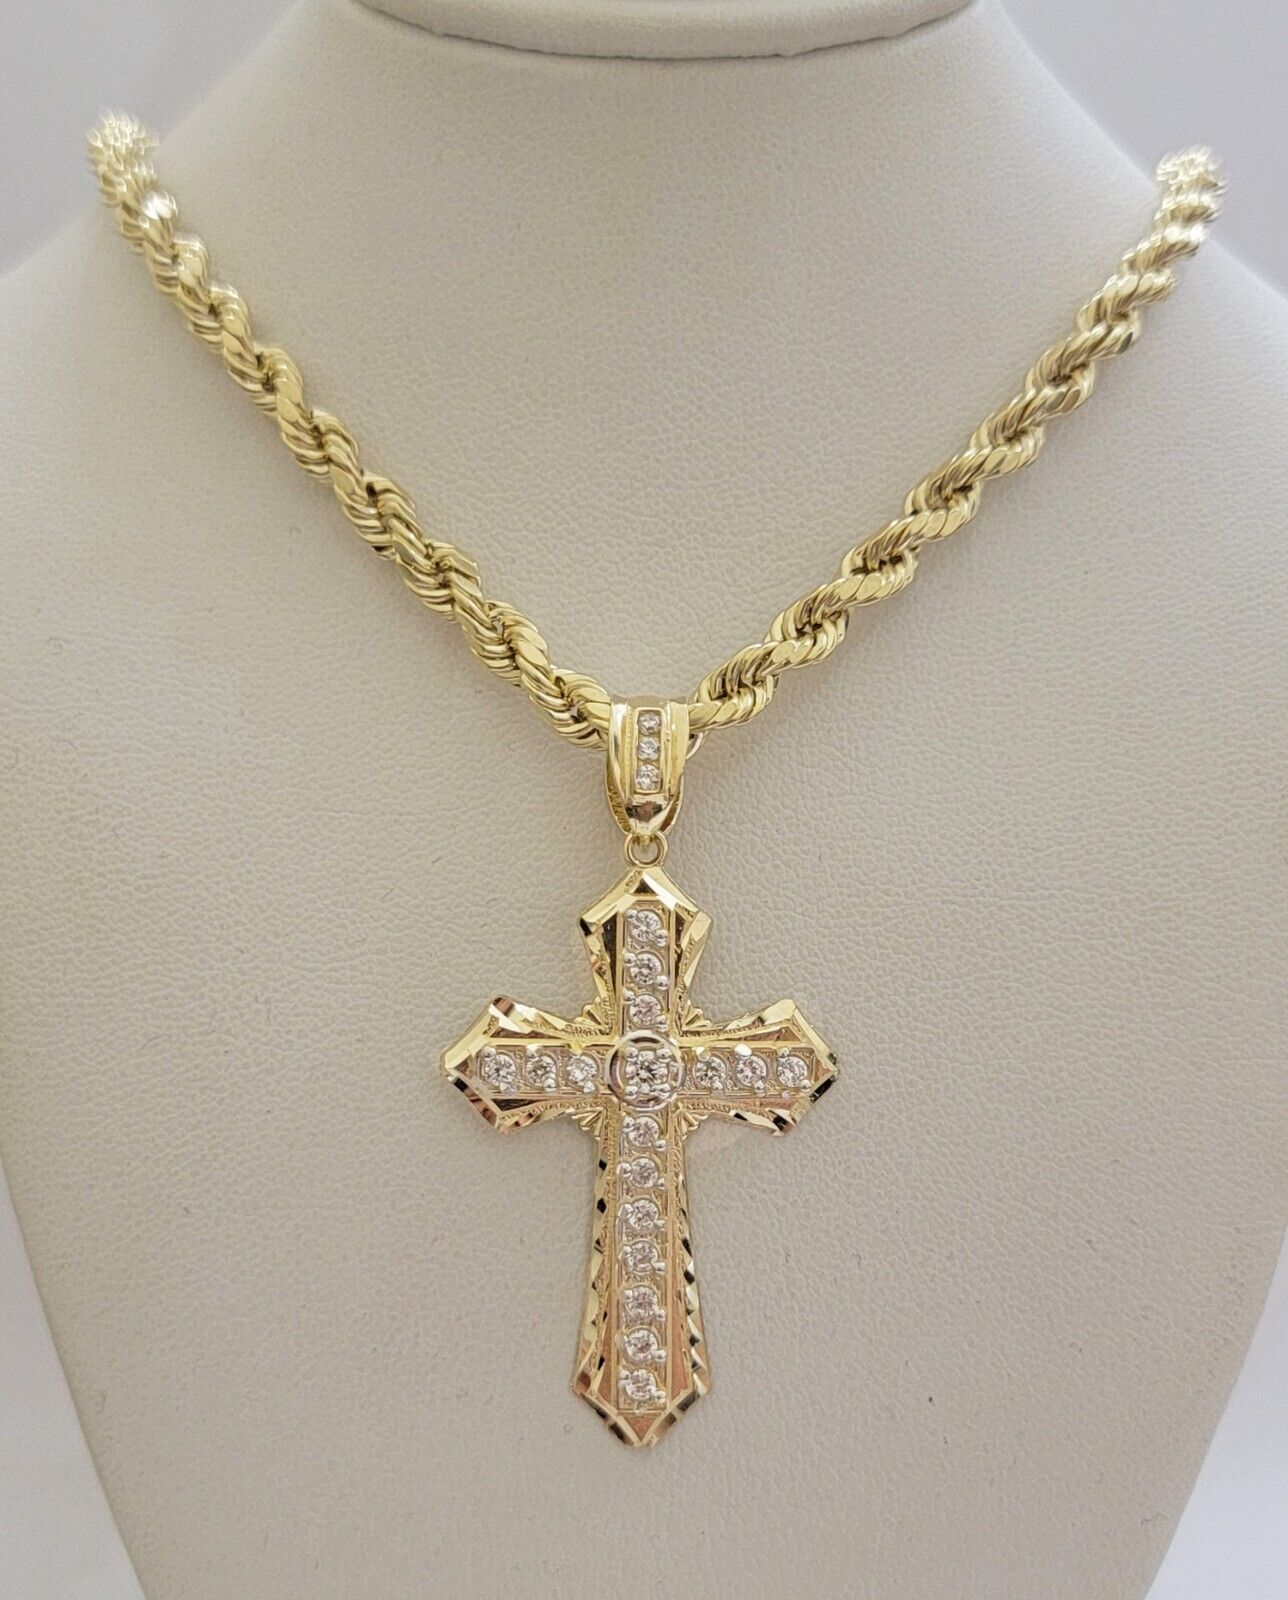 10k Gold Rope Chain Necklace Cross Charm Pendant Set 18-28" inch 5mm, REAL 14kt